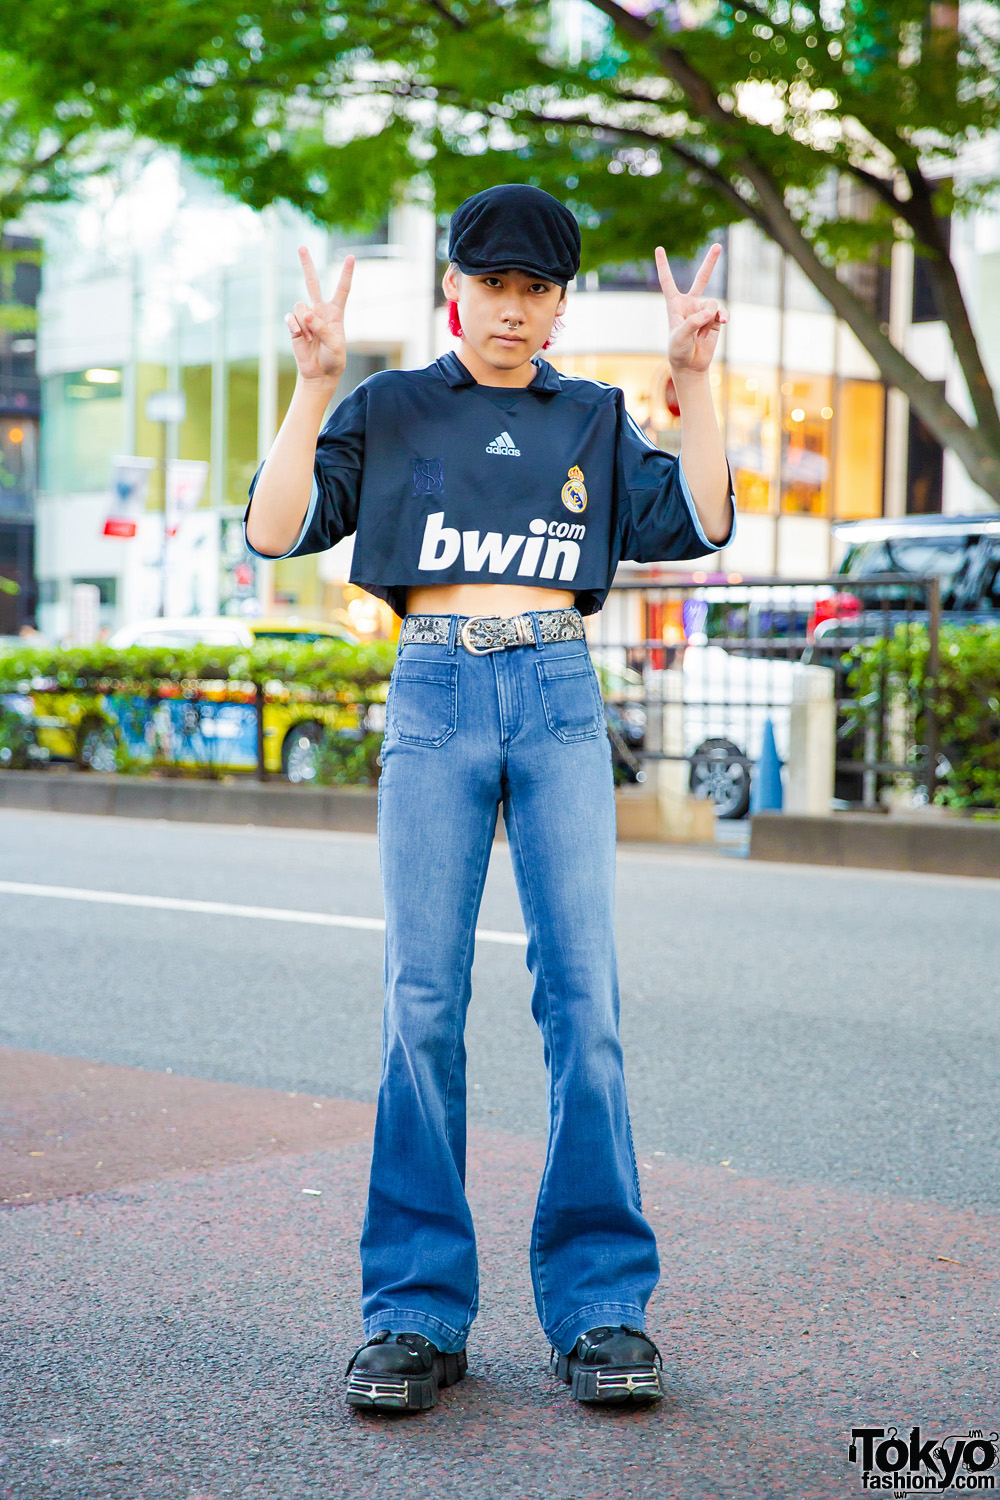 Japanese Street Style in Harajuku w/ Real Madrid Adidas BWIN Cropped Jersey, Flared Jeans, New Rock Buckle Shoes & Newsboy Cap